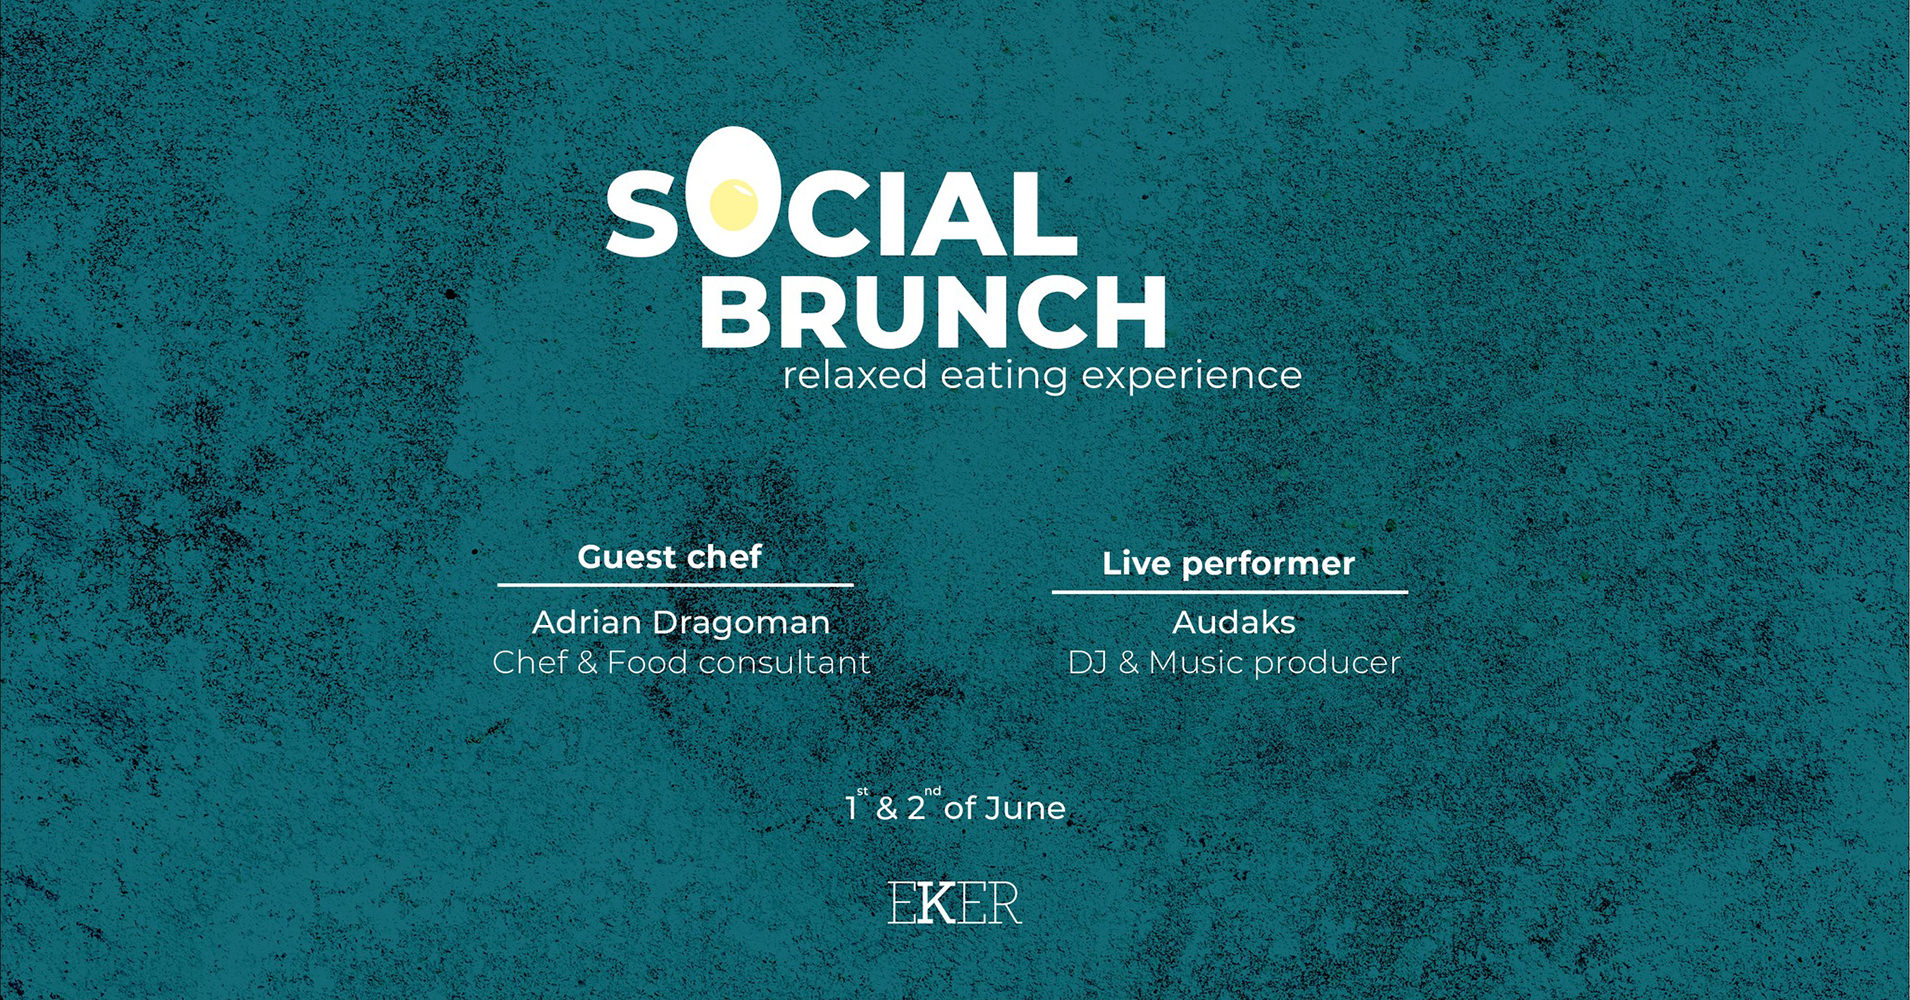 Social Brunch - relaxed eating experince